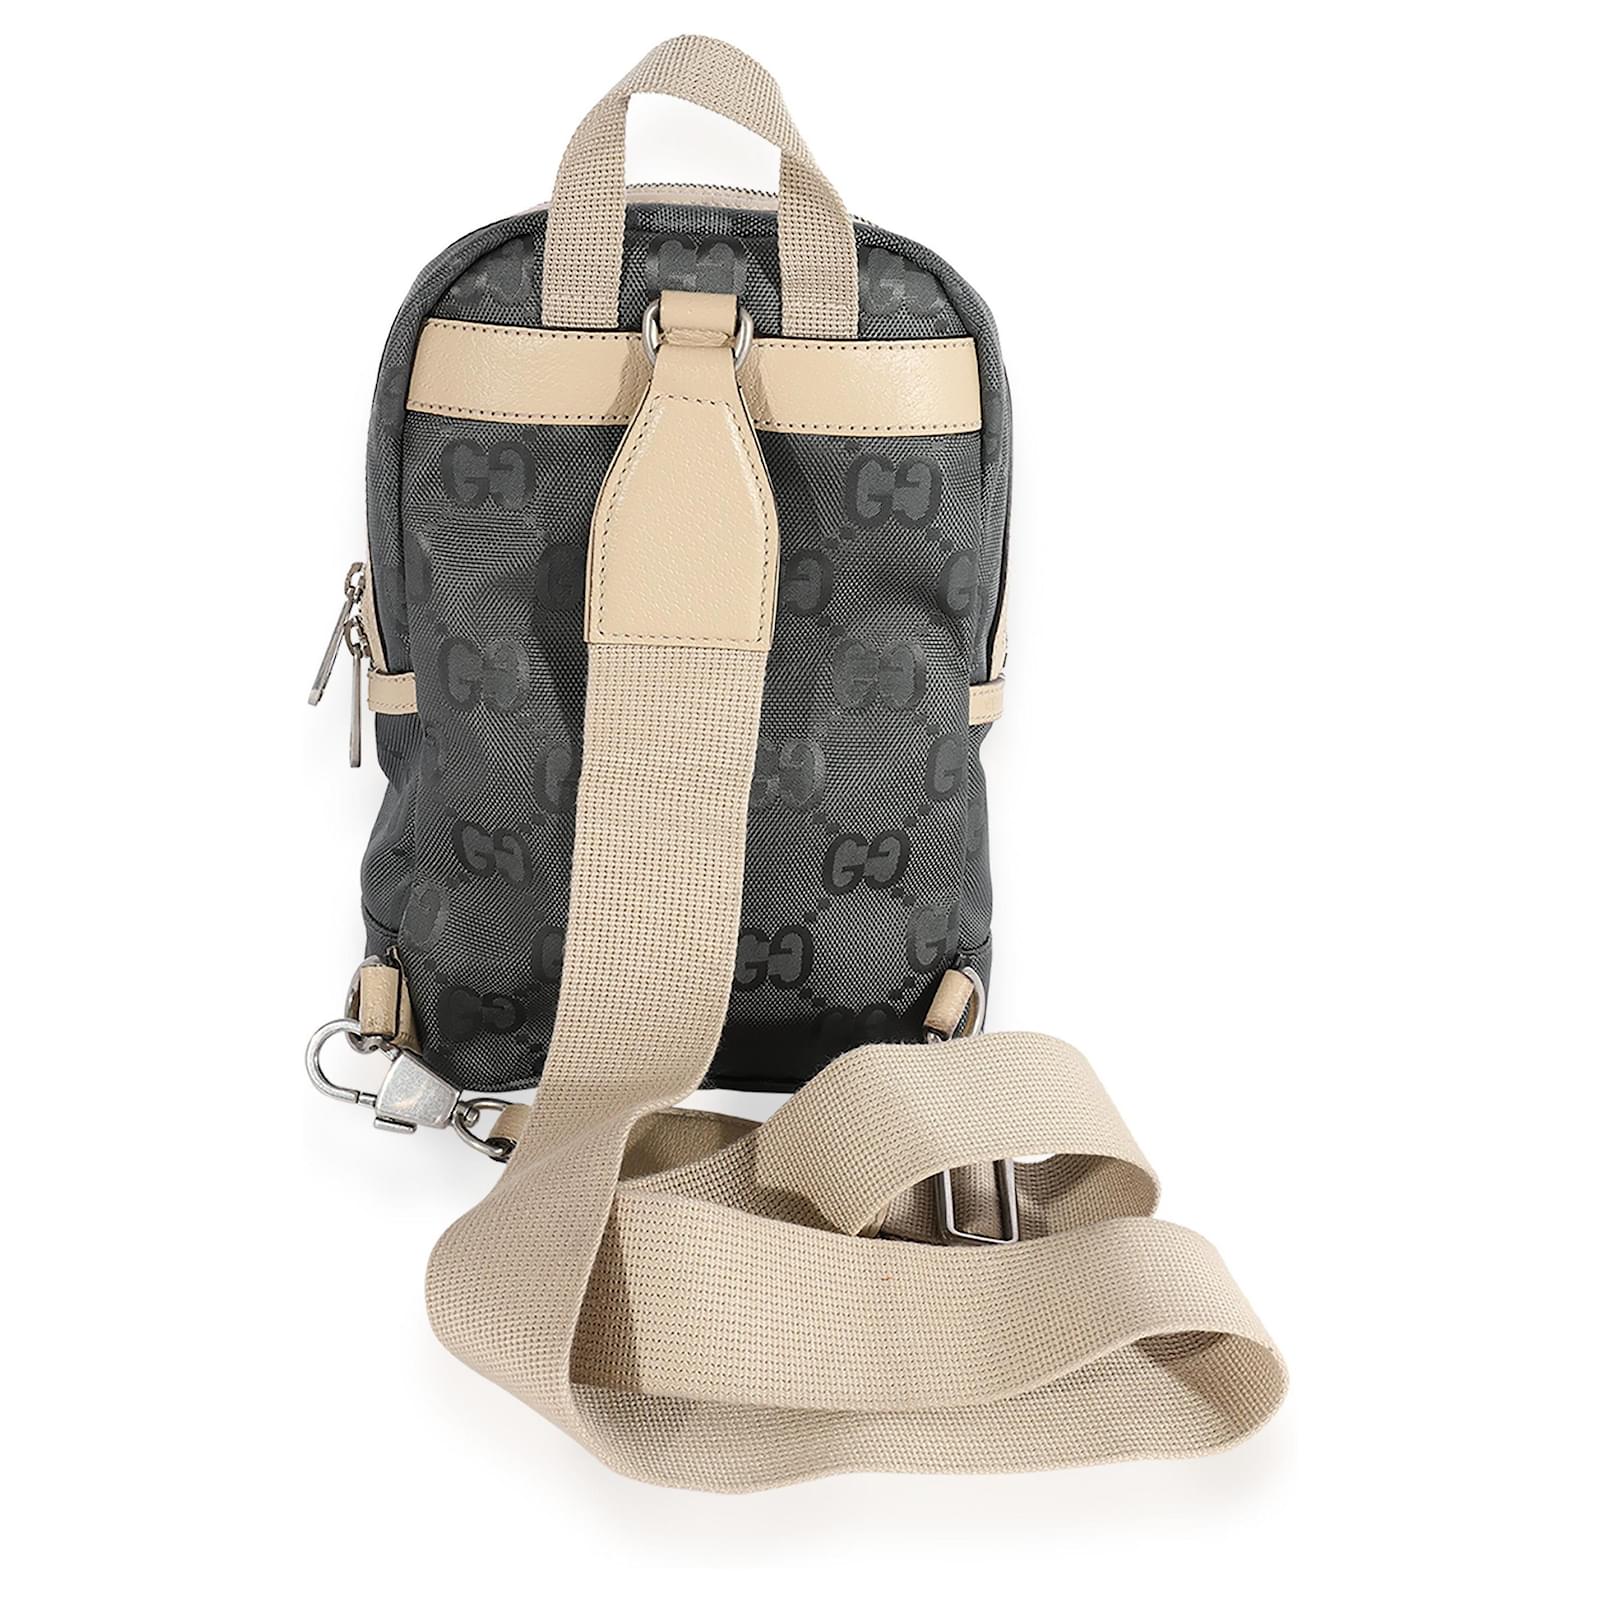 Python backpack with Double G in beige and black